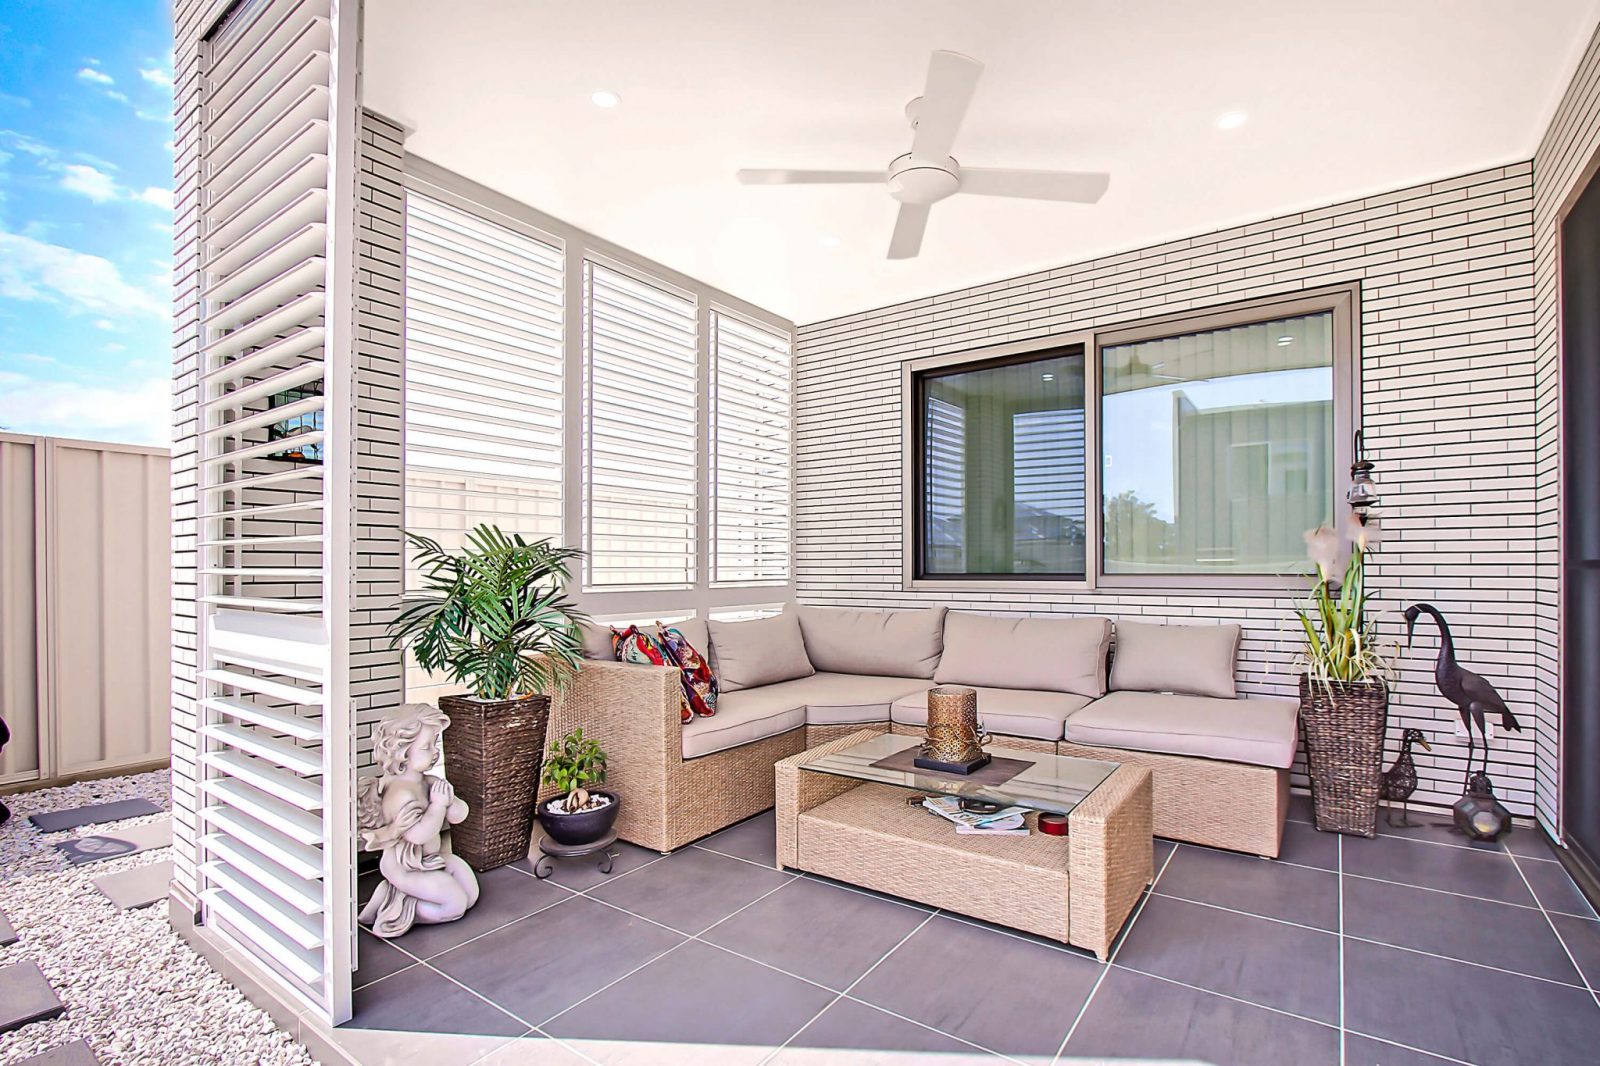 louvre shutters for outdoor areas